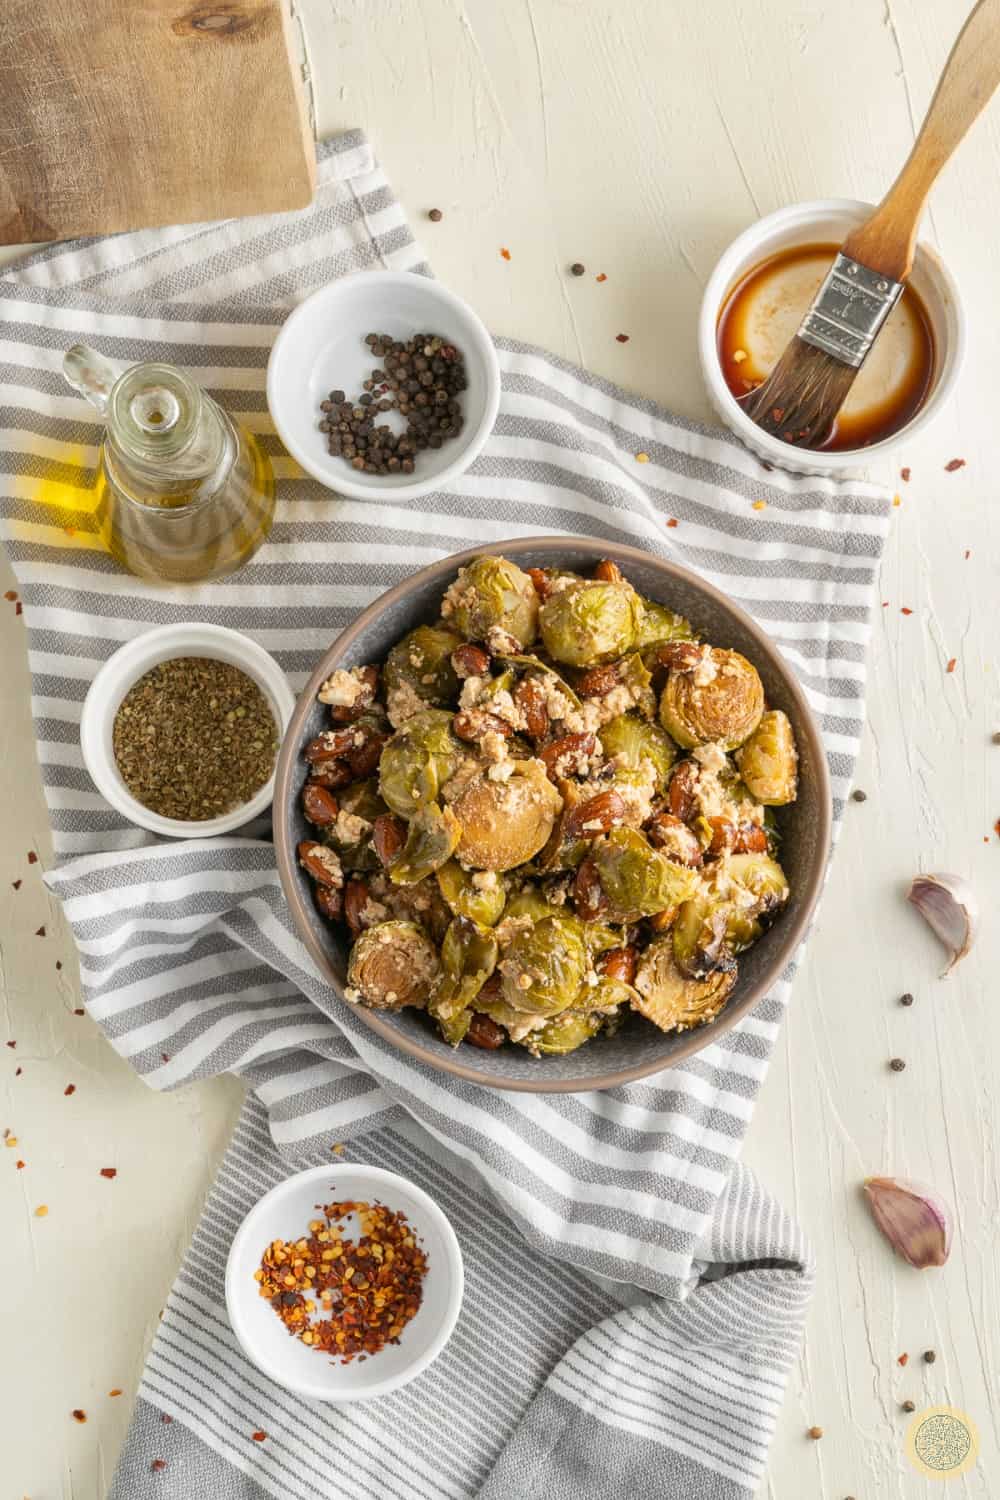 How to Make Roasted Brussel Sprouts with Almonds and Feta: